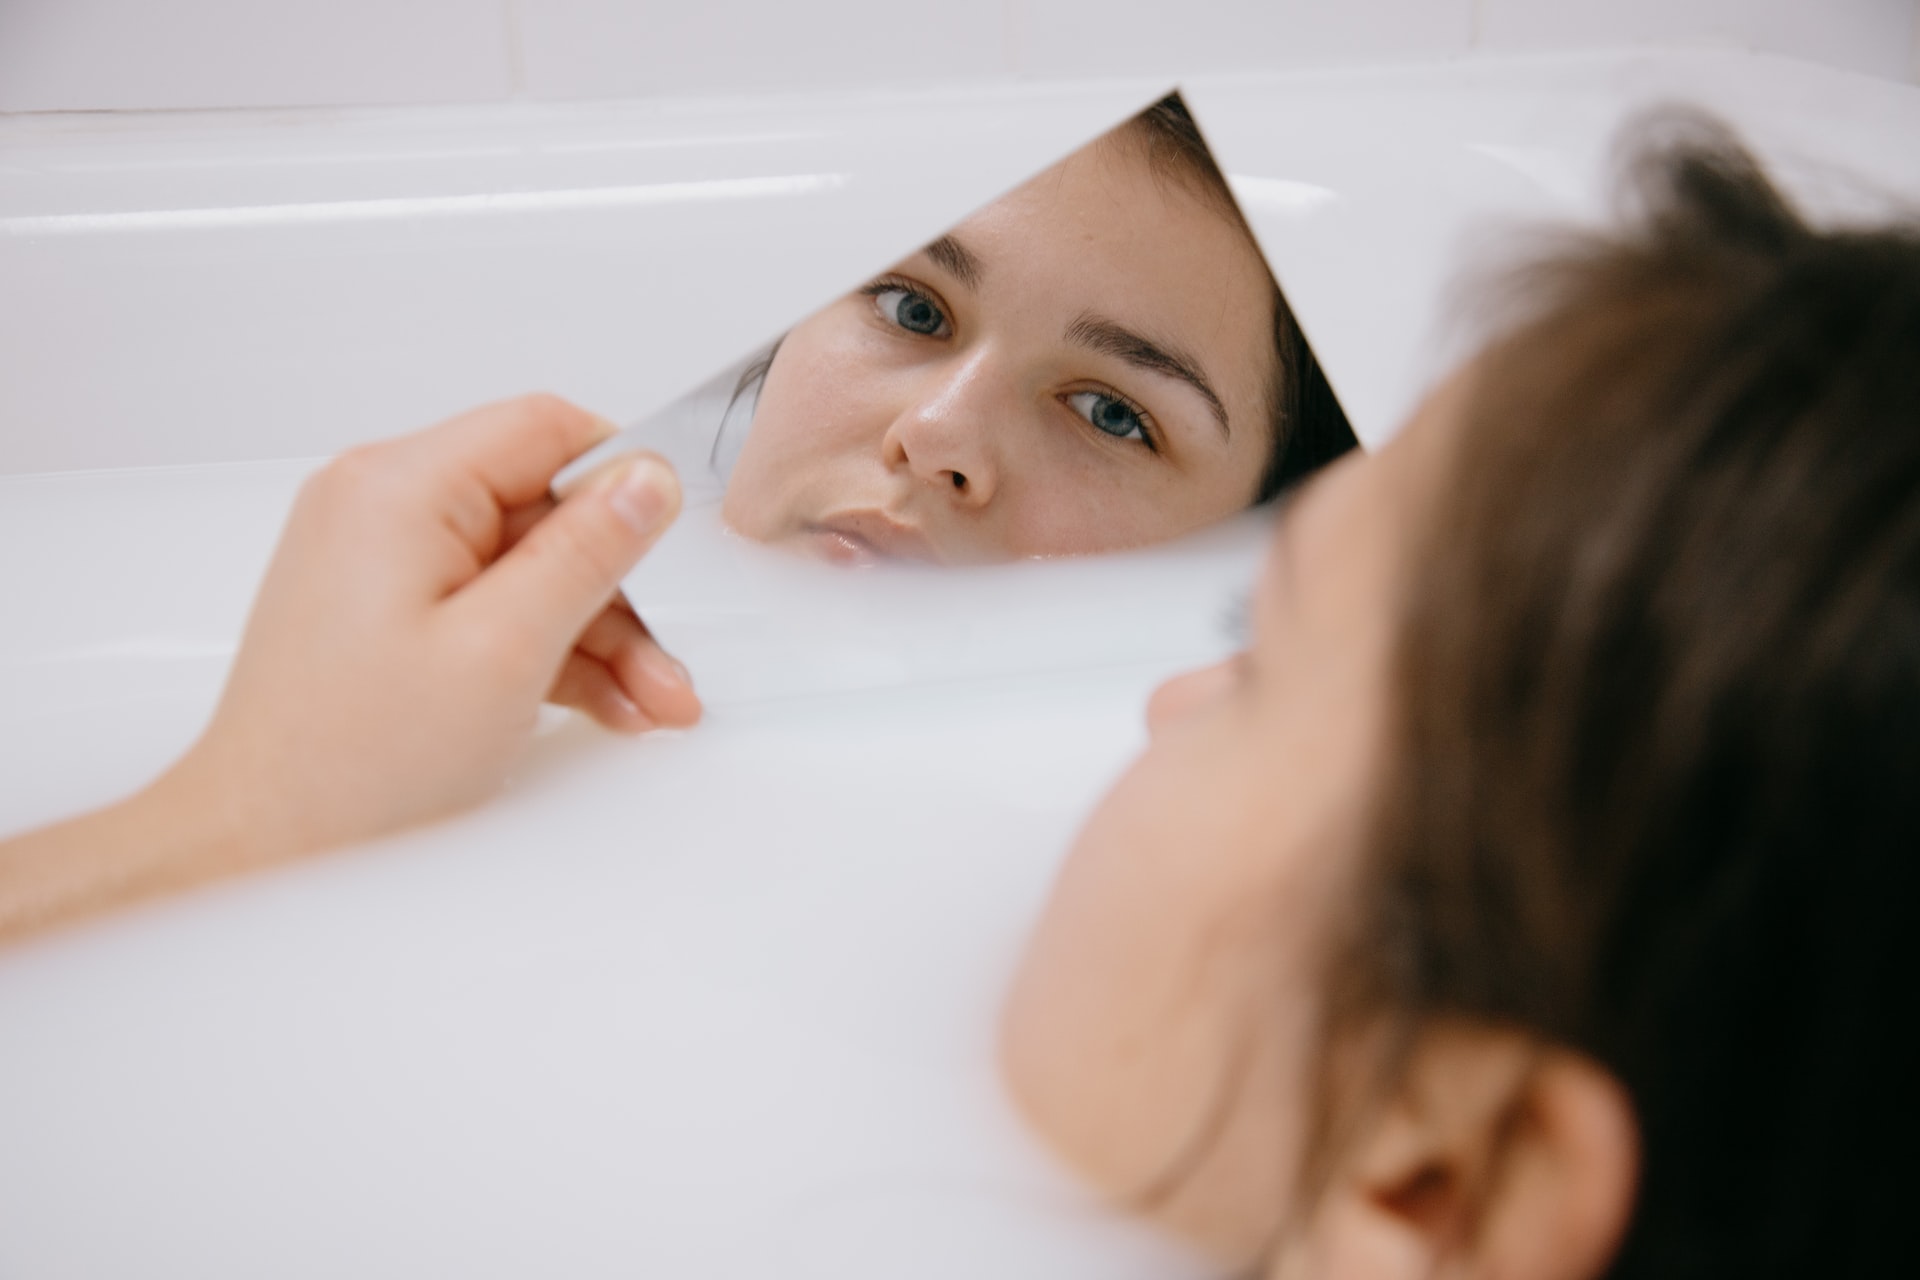 A woman lying in a bathtub looks at her face in a mirror.